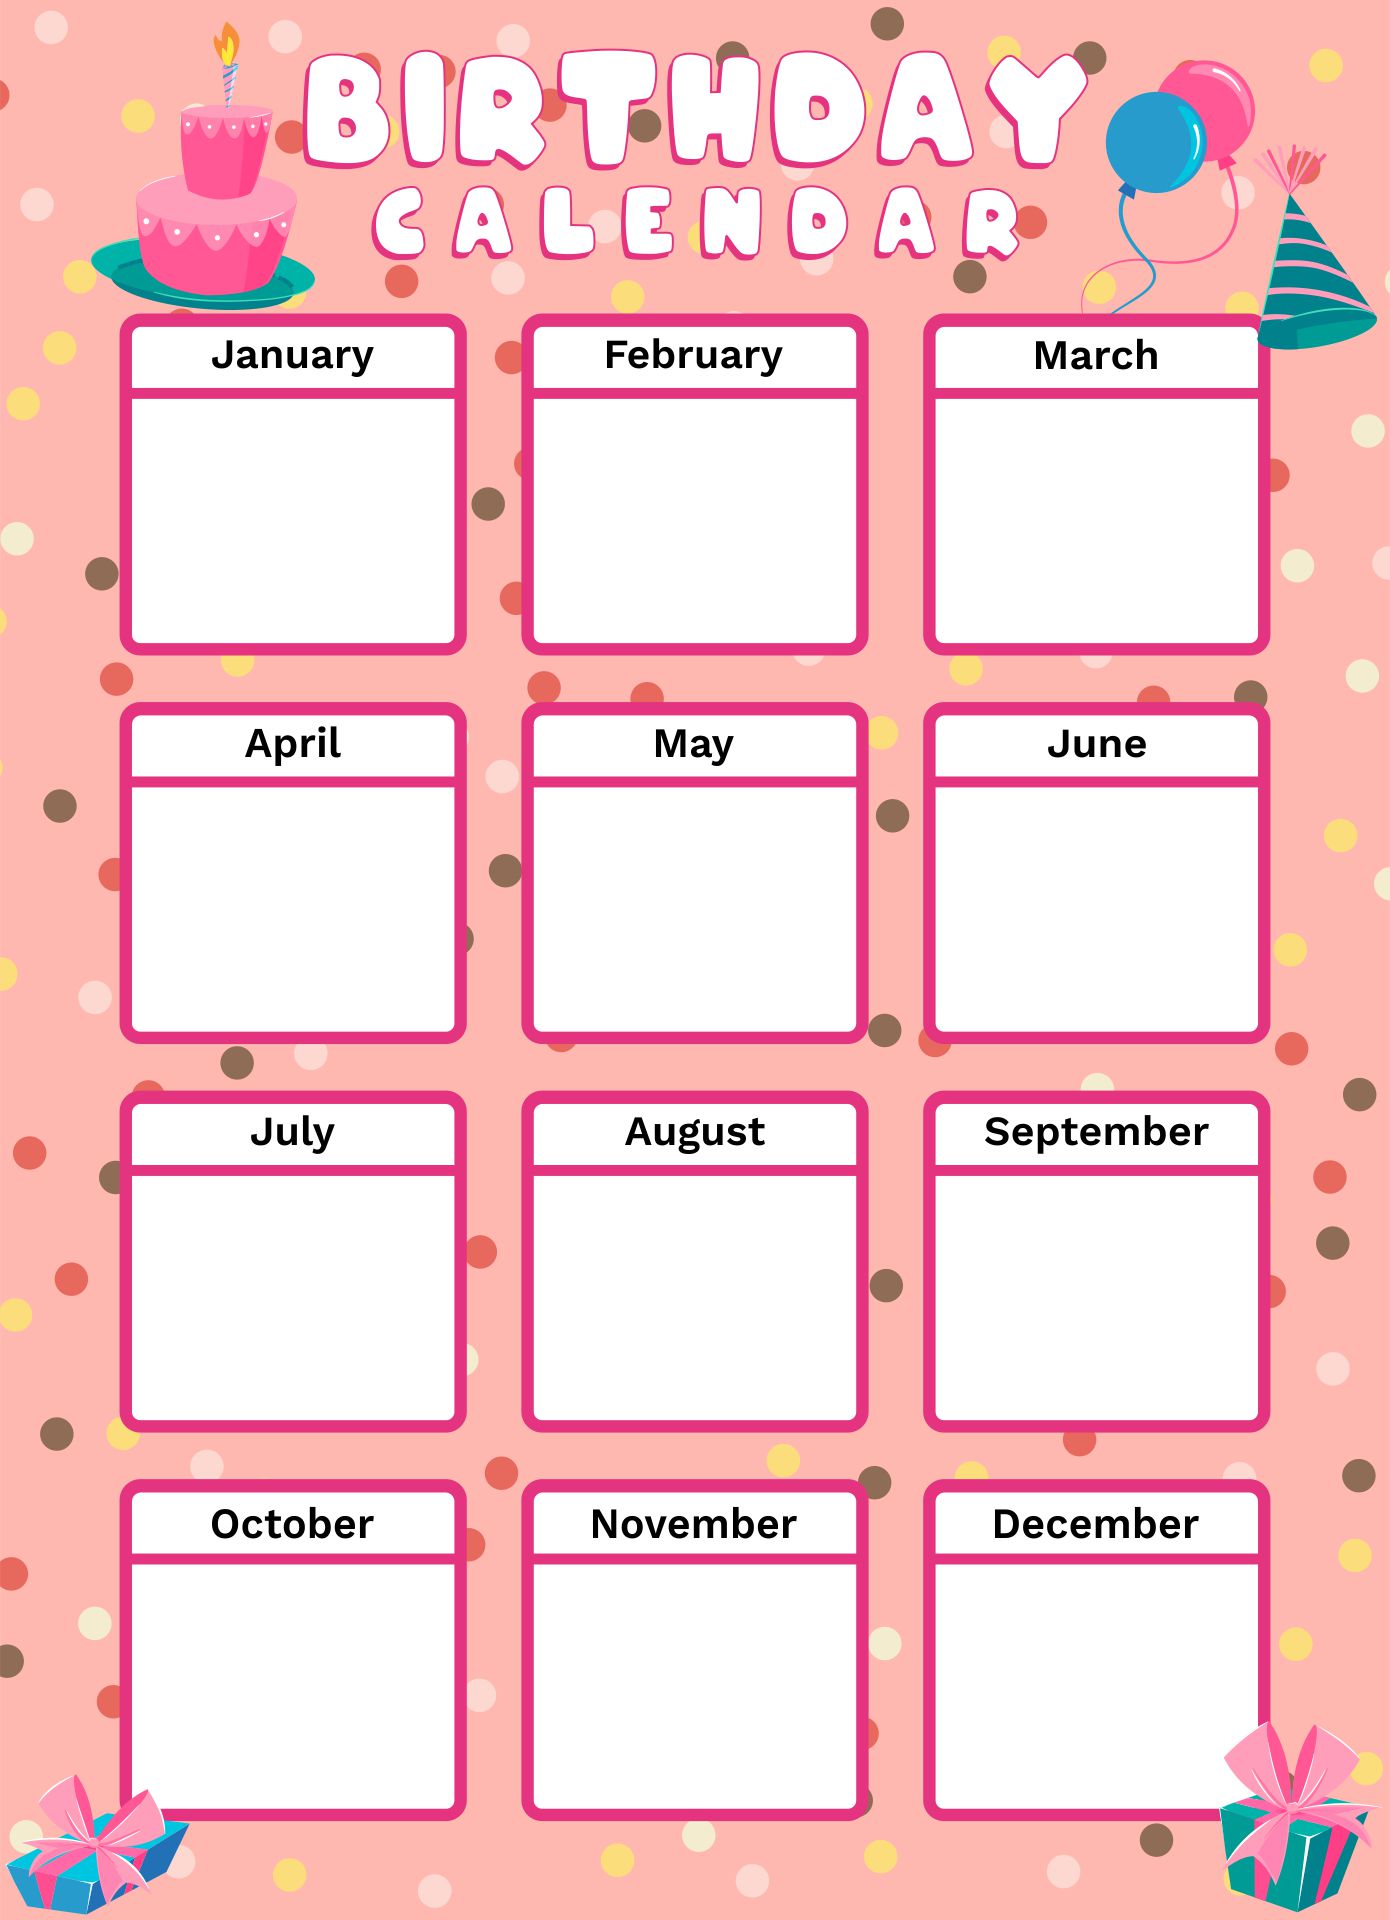 Calendar Printable Images Gallery Category Page 34